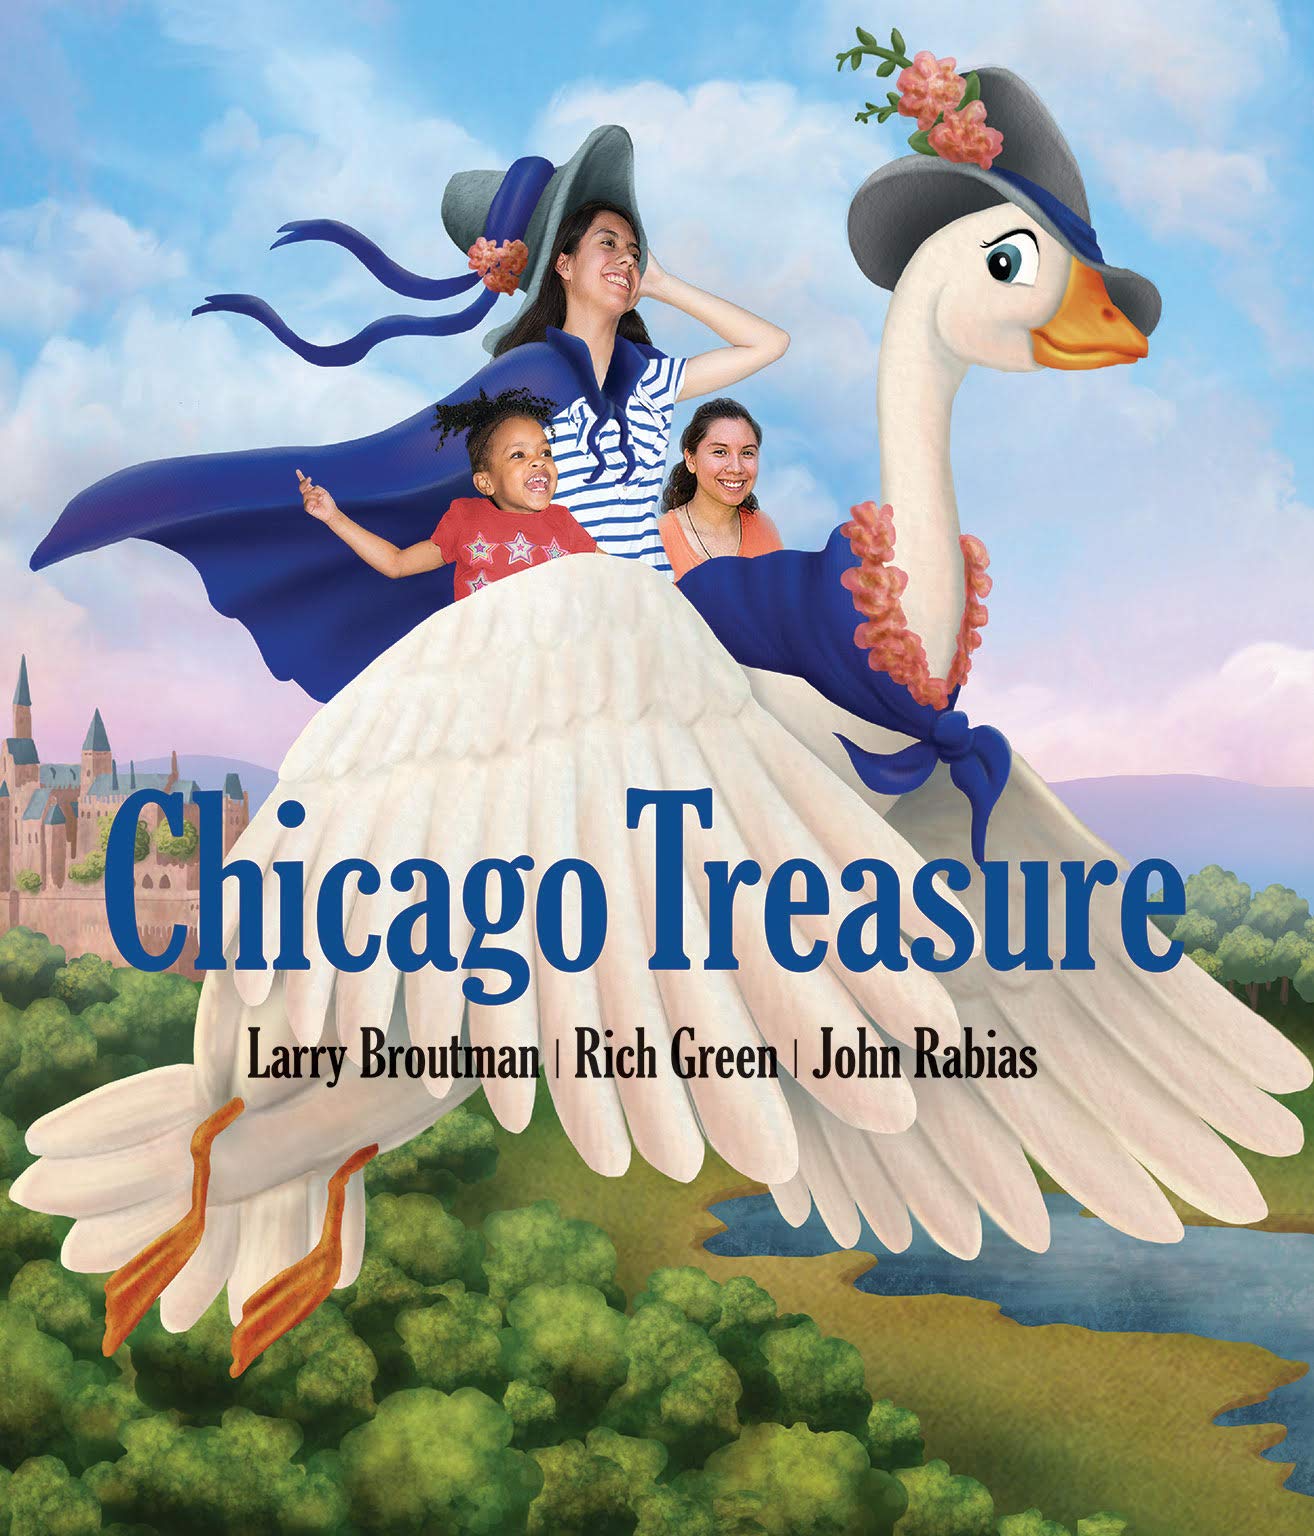 Chicago Treasure Book By Larry Broutman book cover